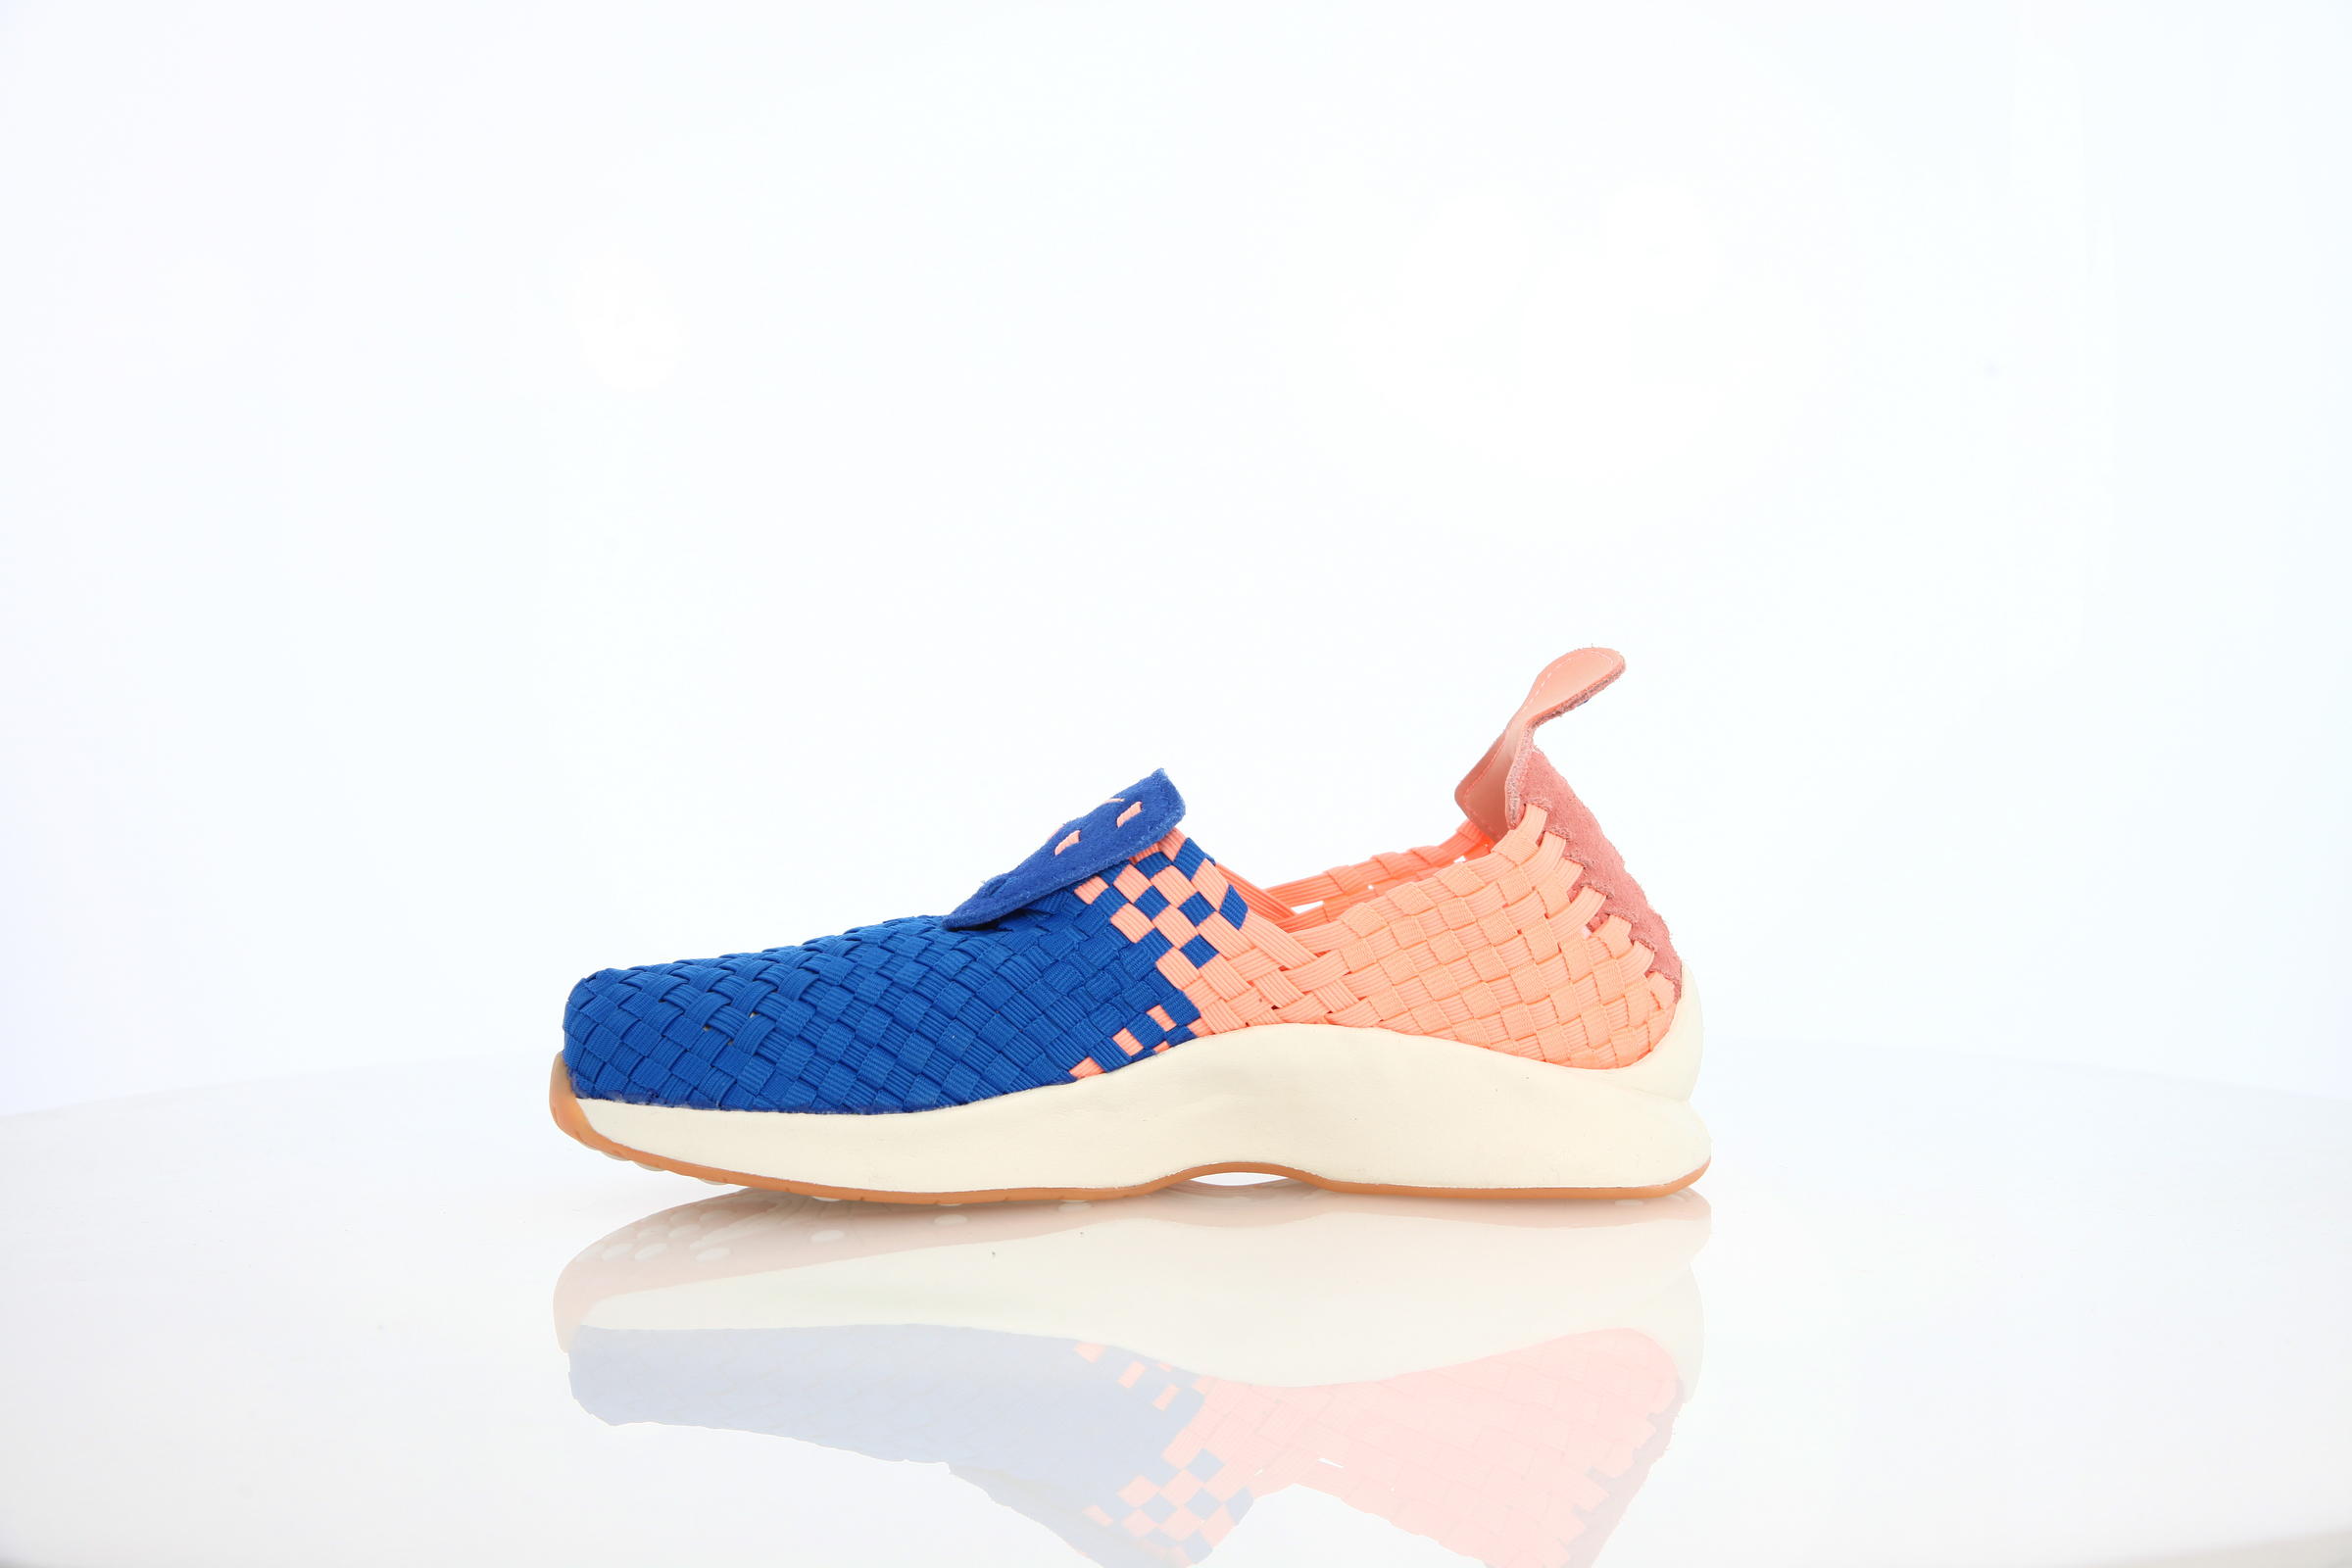 Nike Wmns Air Woven "Sunset Glow"